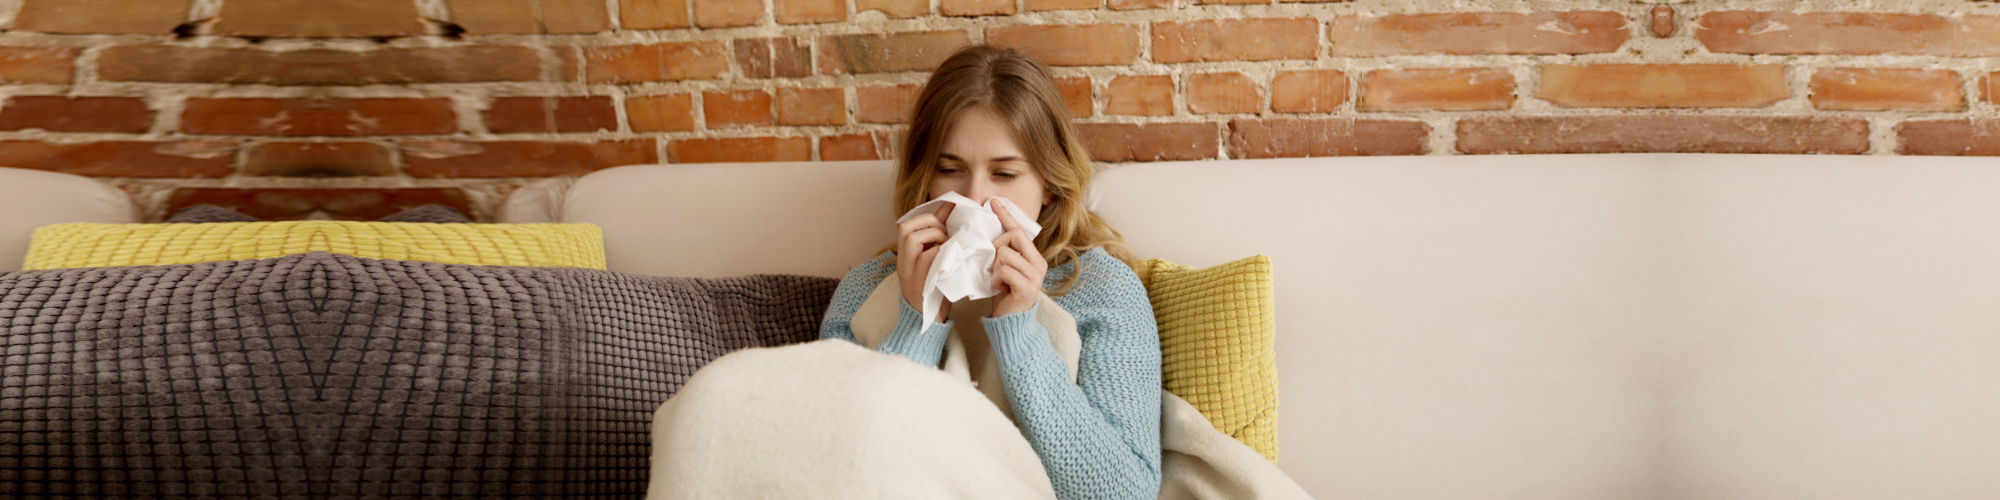 Young ill woman sitting on sofa, she is having cold or flu